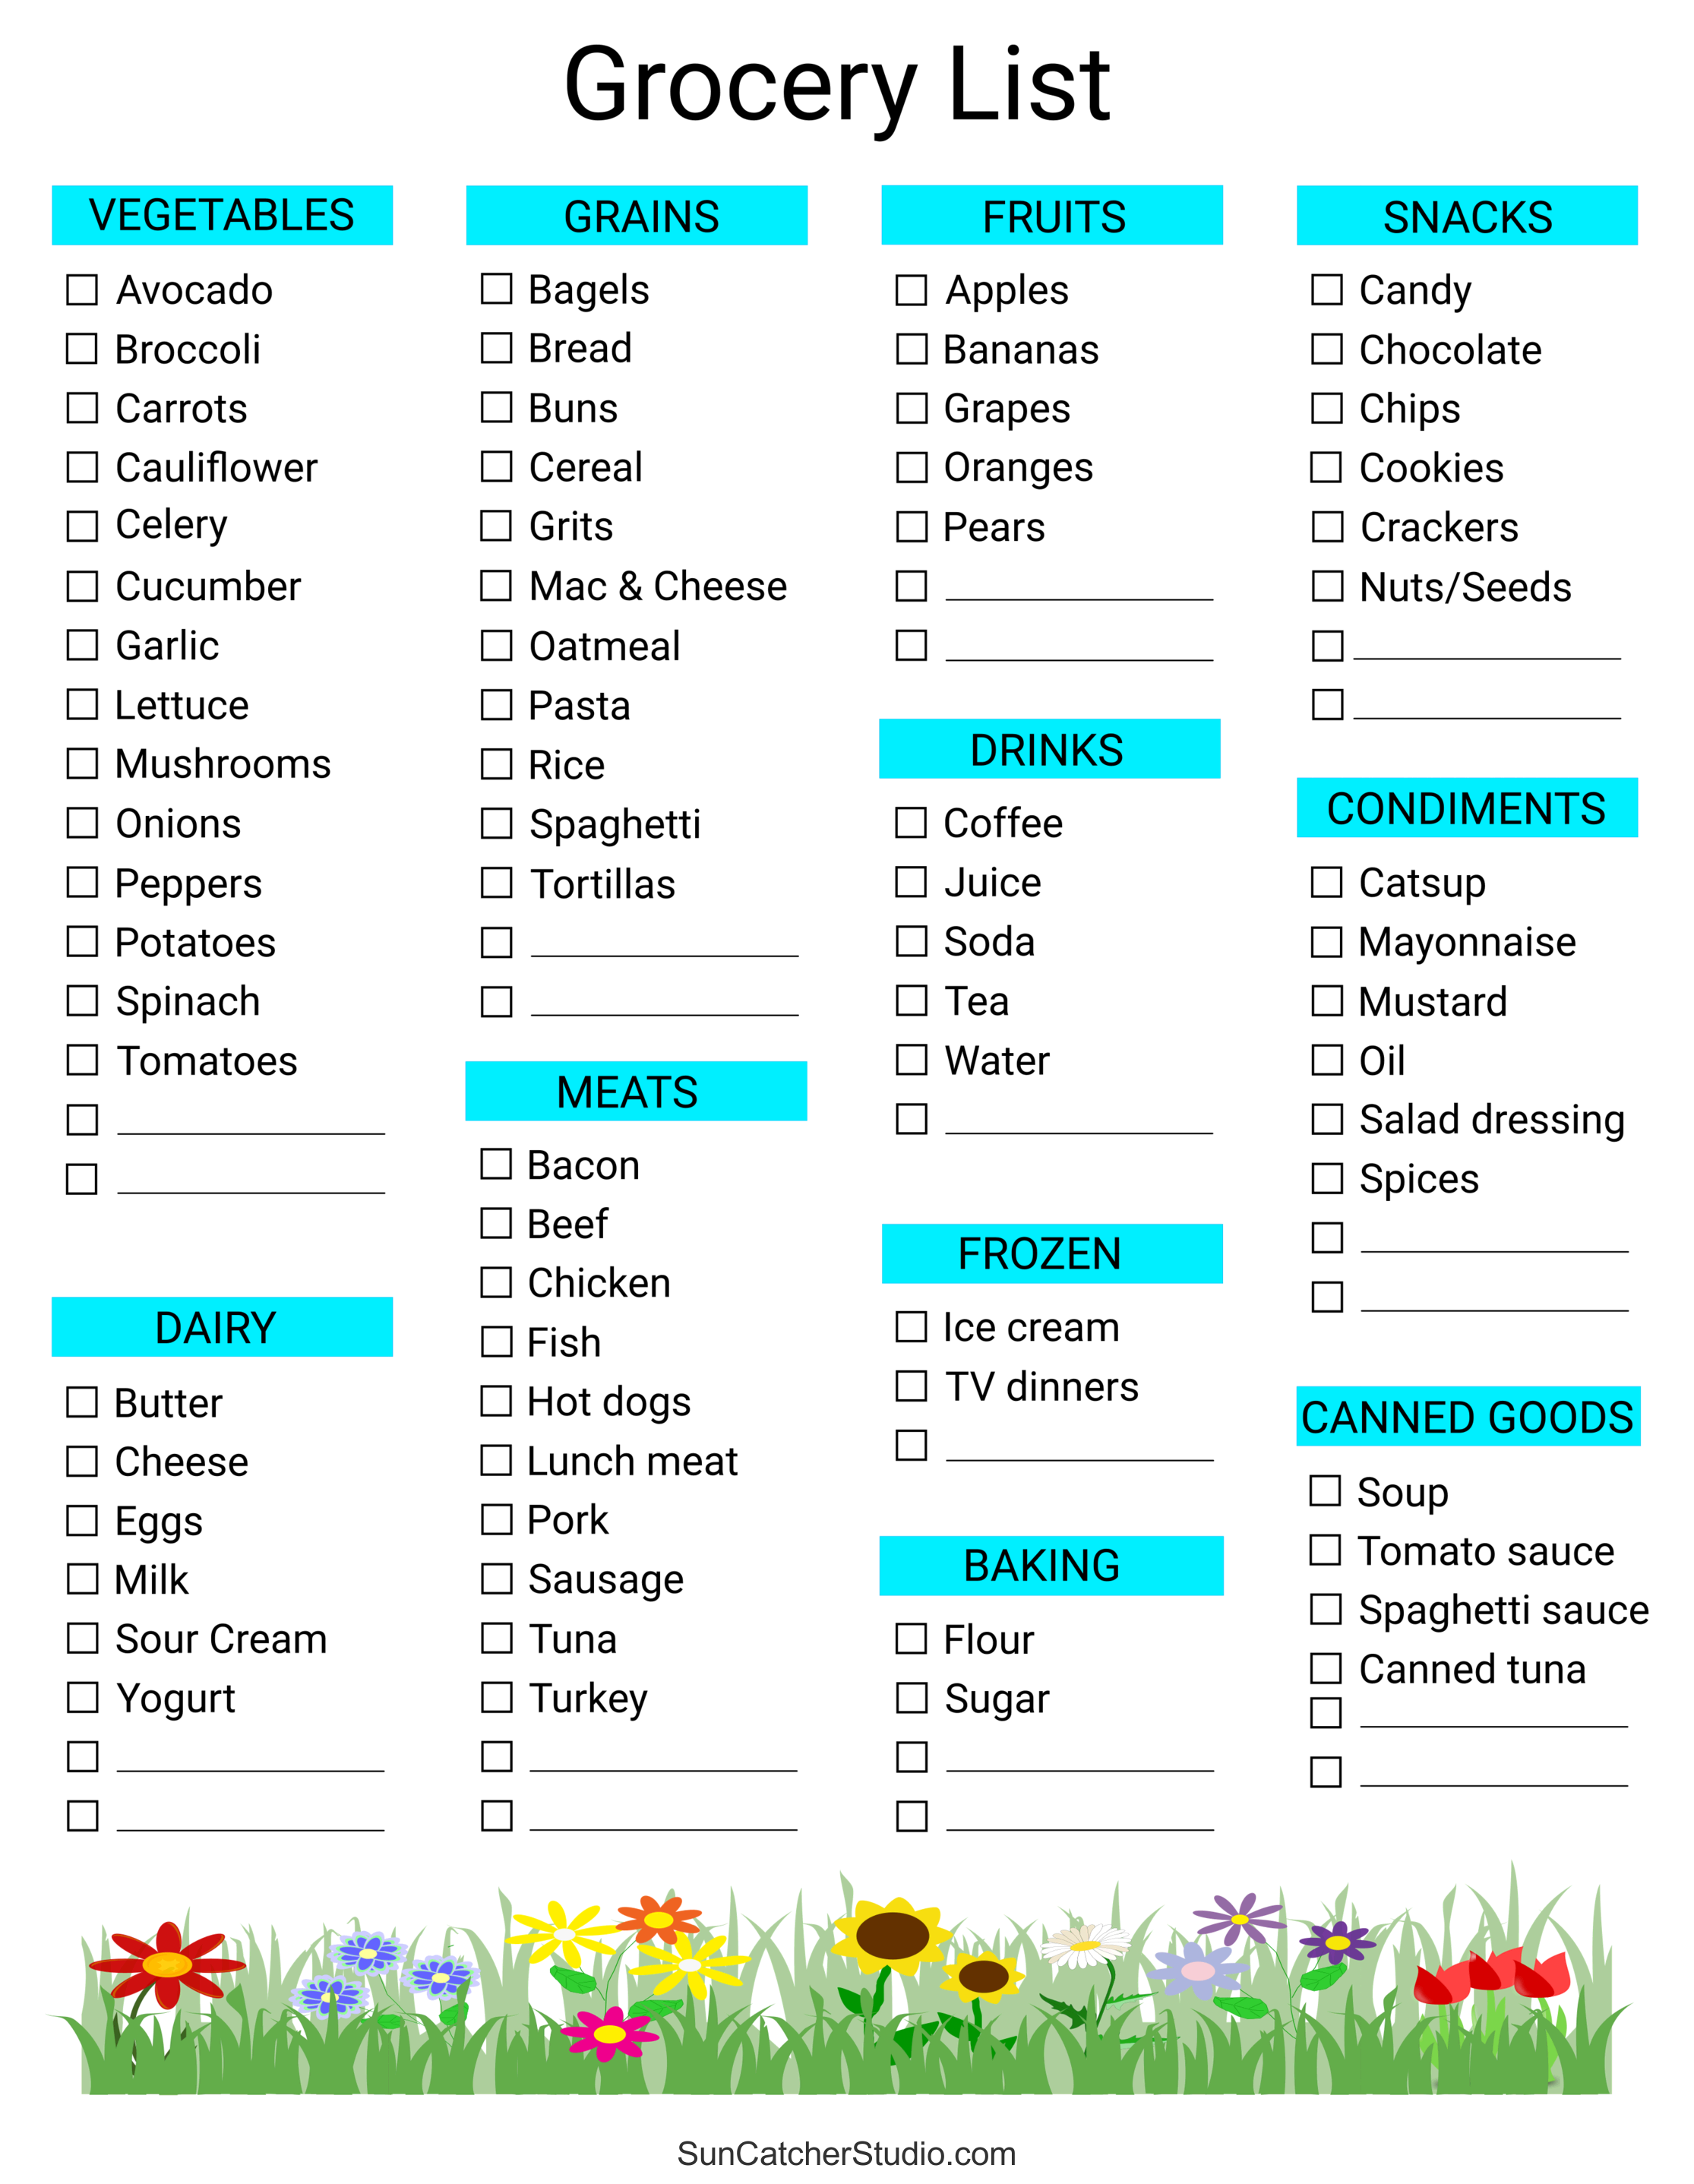 https://suncatcherstudio.com/uploads/printables/grocery-list/pdf-png/free-printable-grocery-list-by-category-1-010101-00eeff.png